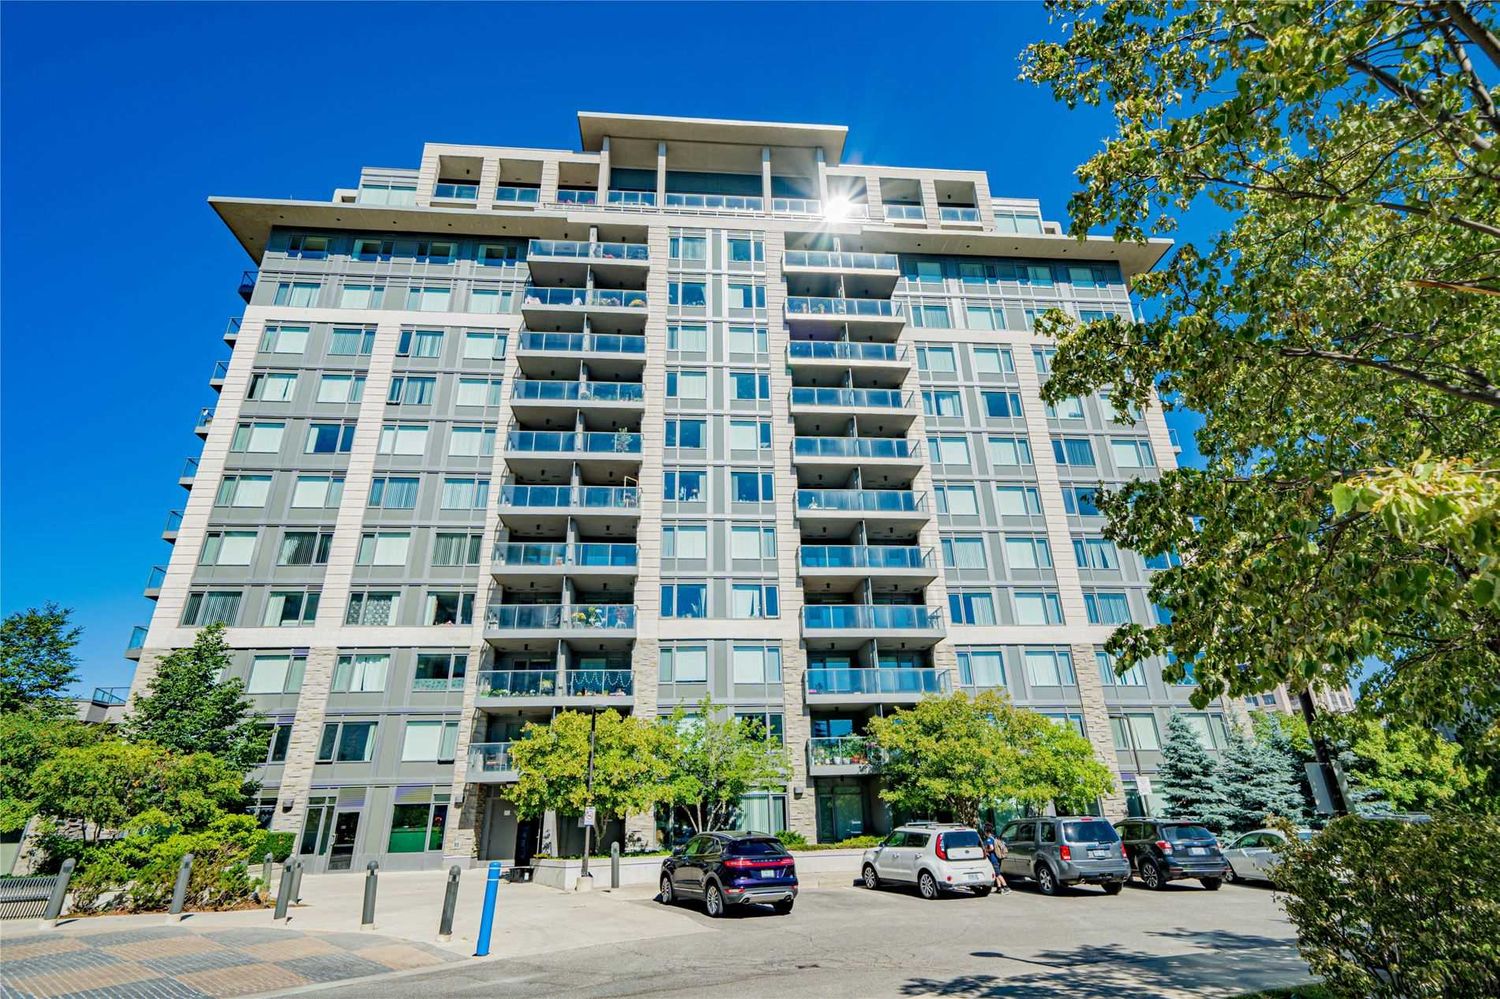 215-273 South Park Road. Eden Park Towers Condos is located in  Markham, Toronto - image #2 of 3